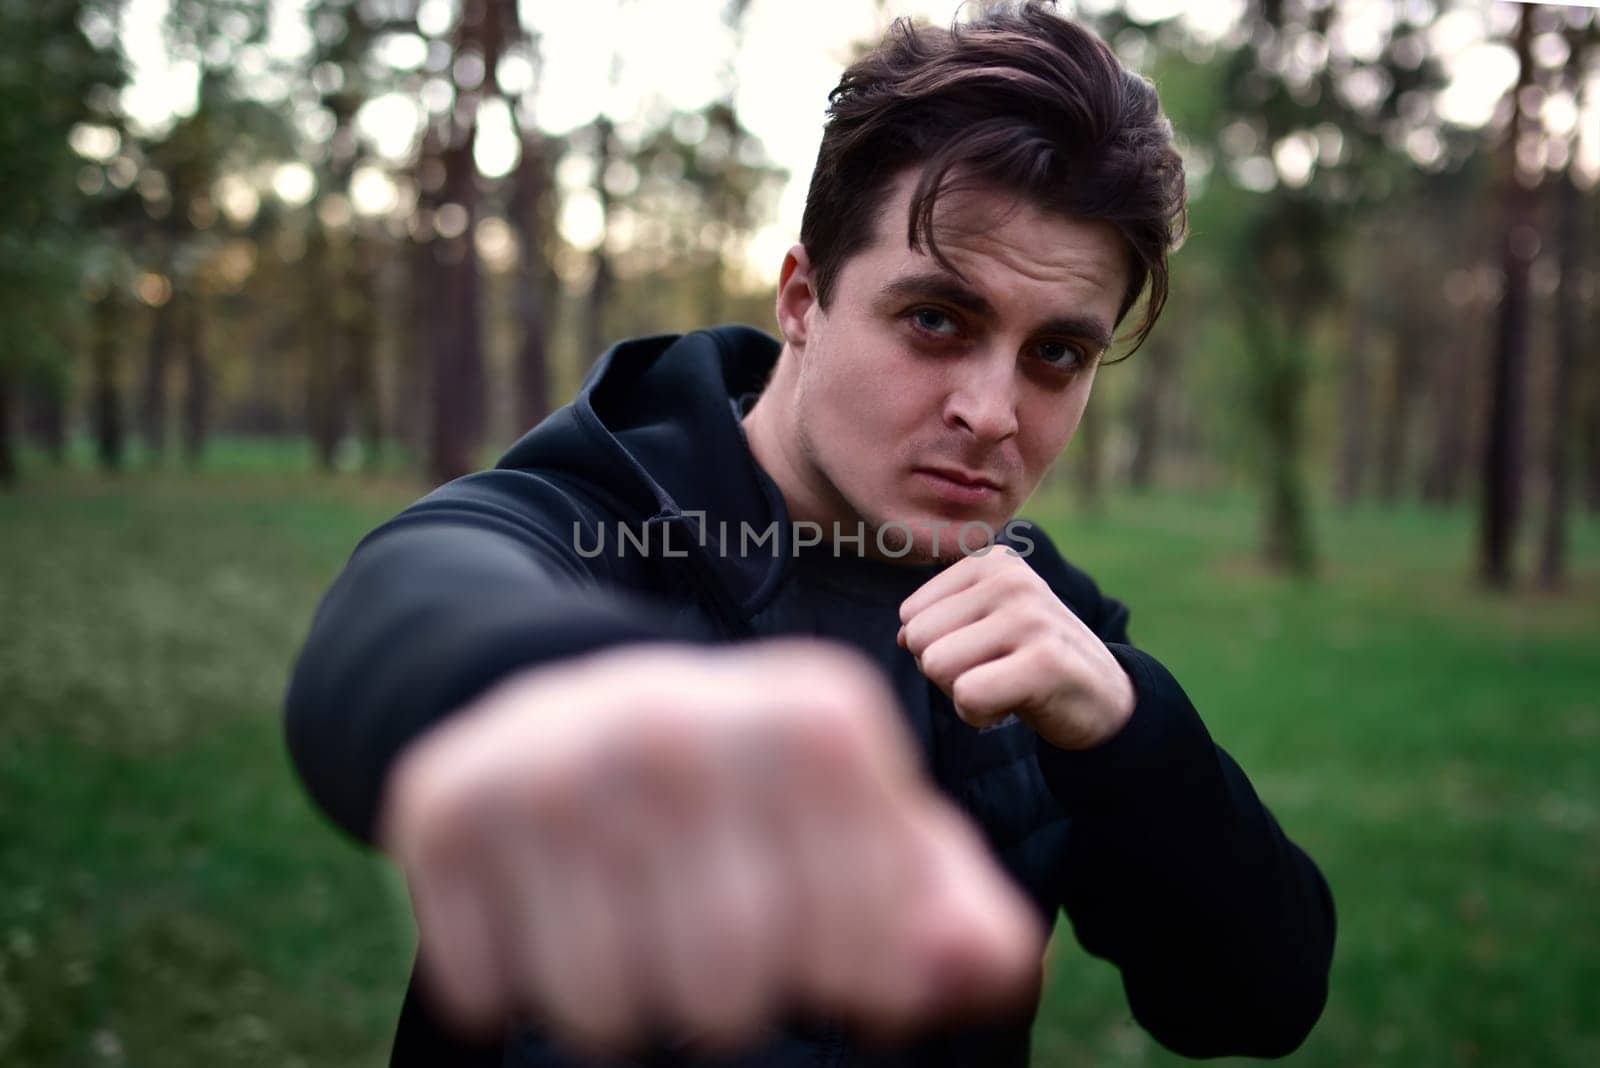 sporty young man in a sporty black jacket in a fighting pose raising his fist for a punch against a background of forest trees